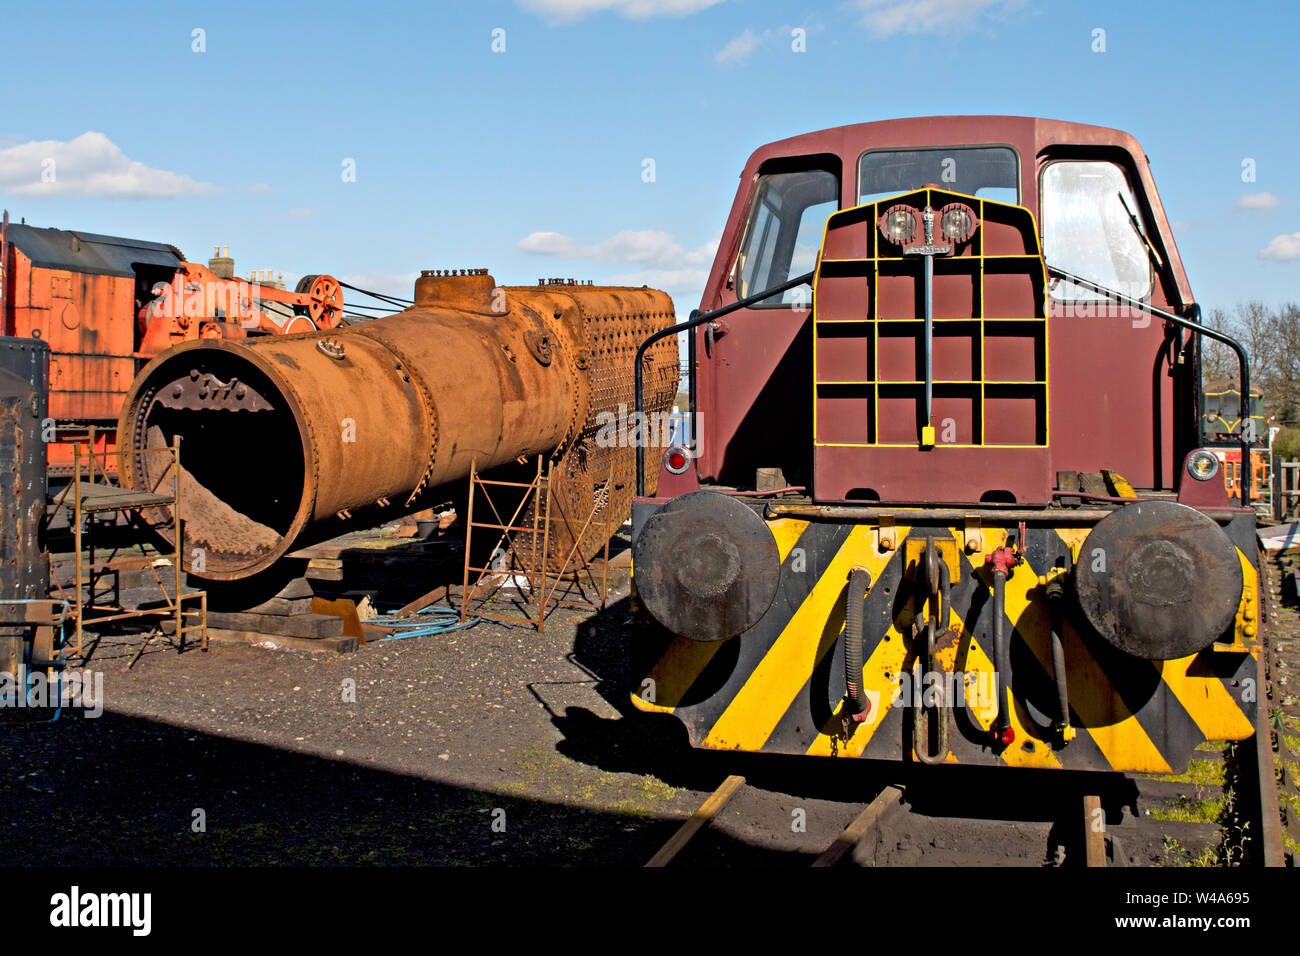 A steam engine boiler in the yard at Wansford on the Nene Valley Railway UK. A vintage shunting loco is on the right Stock Photo